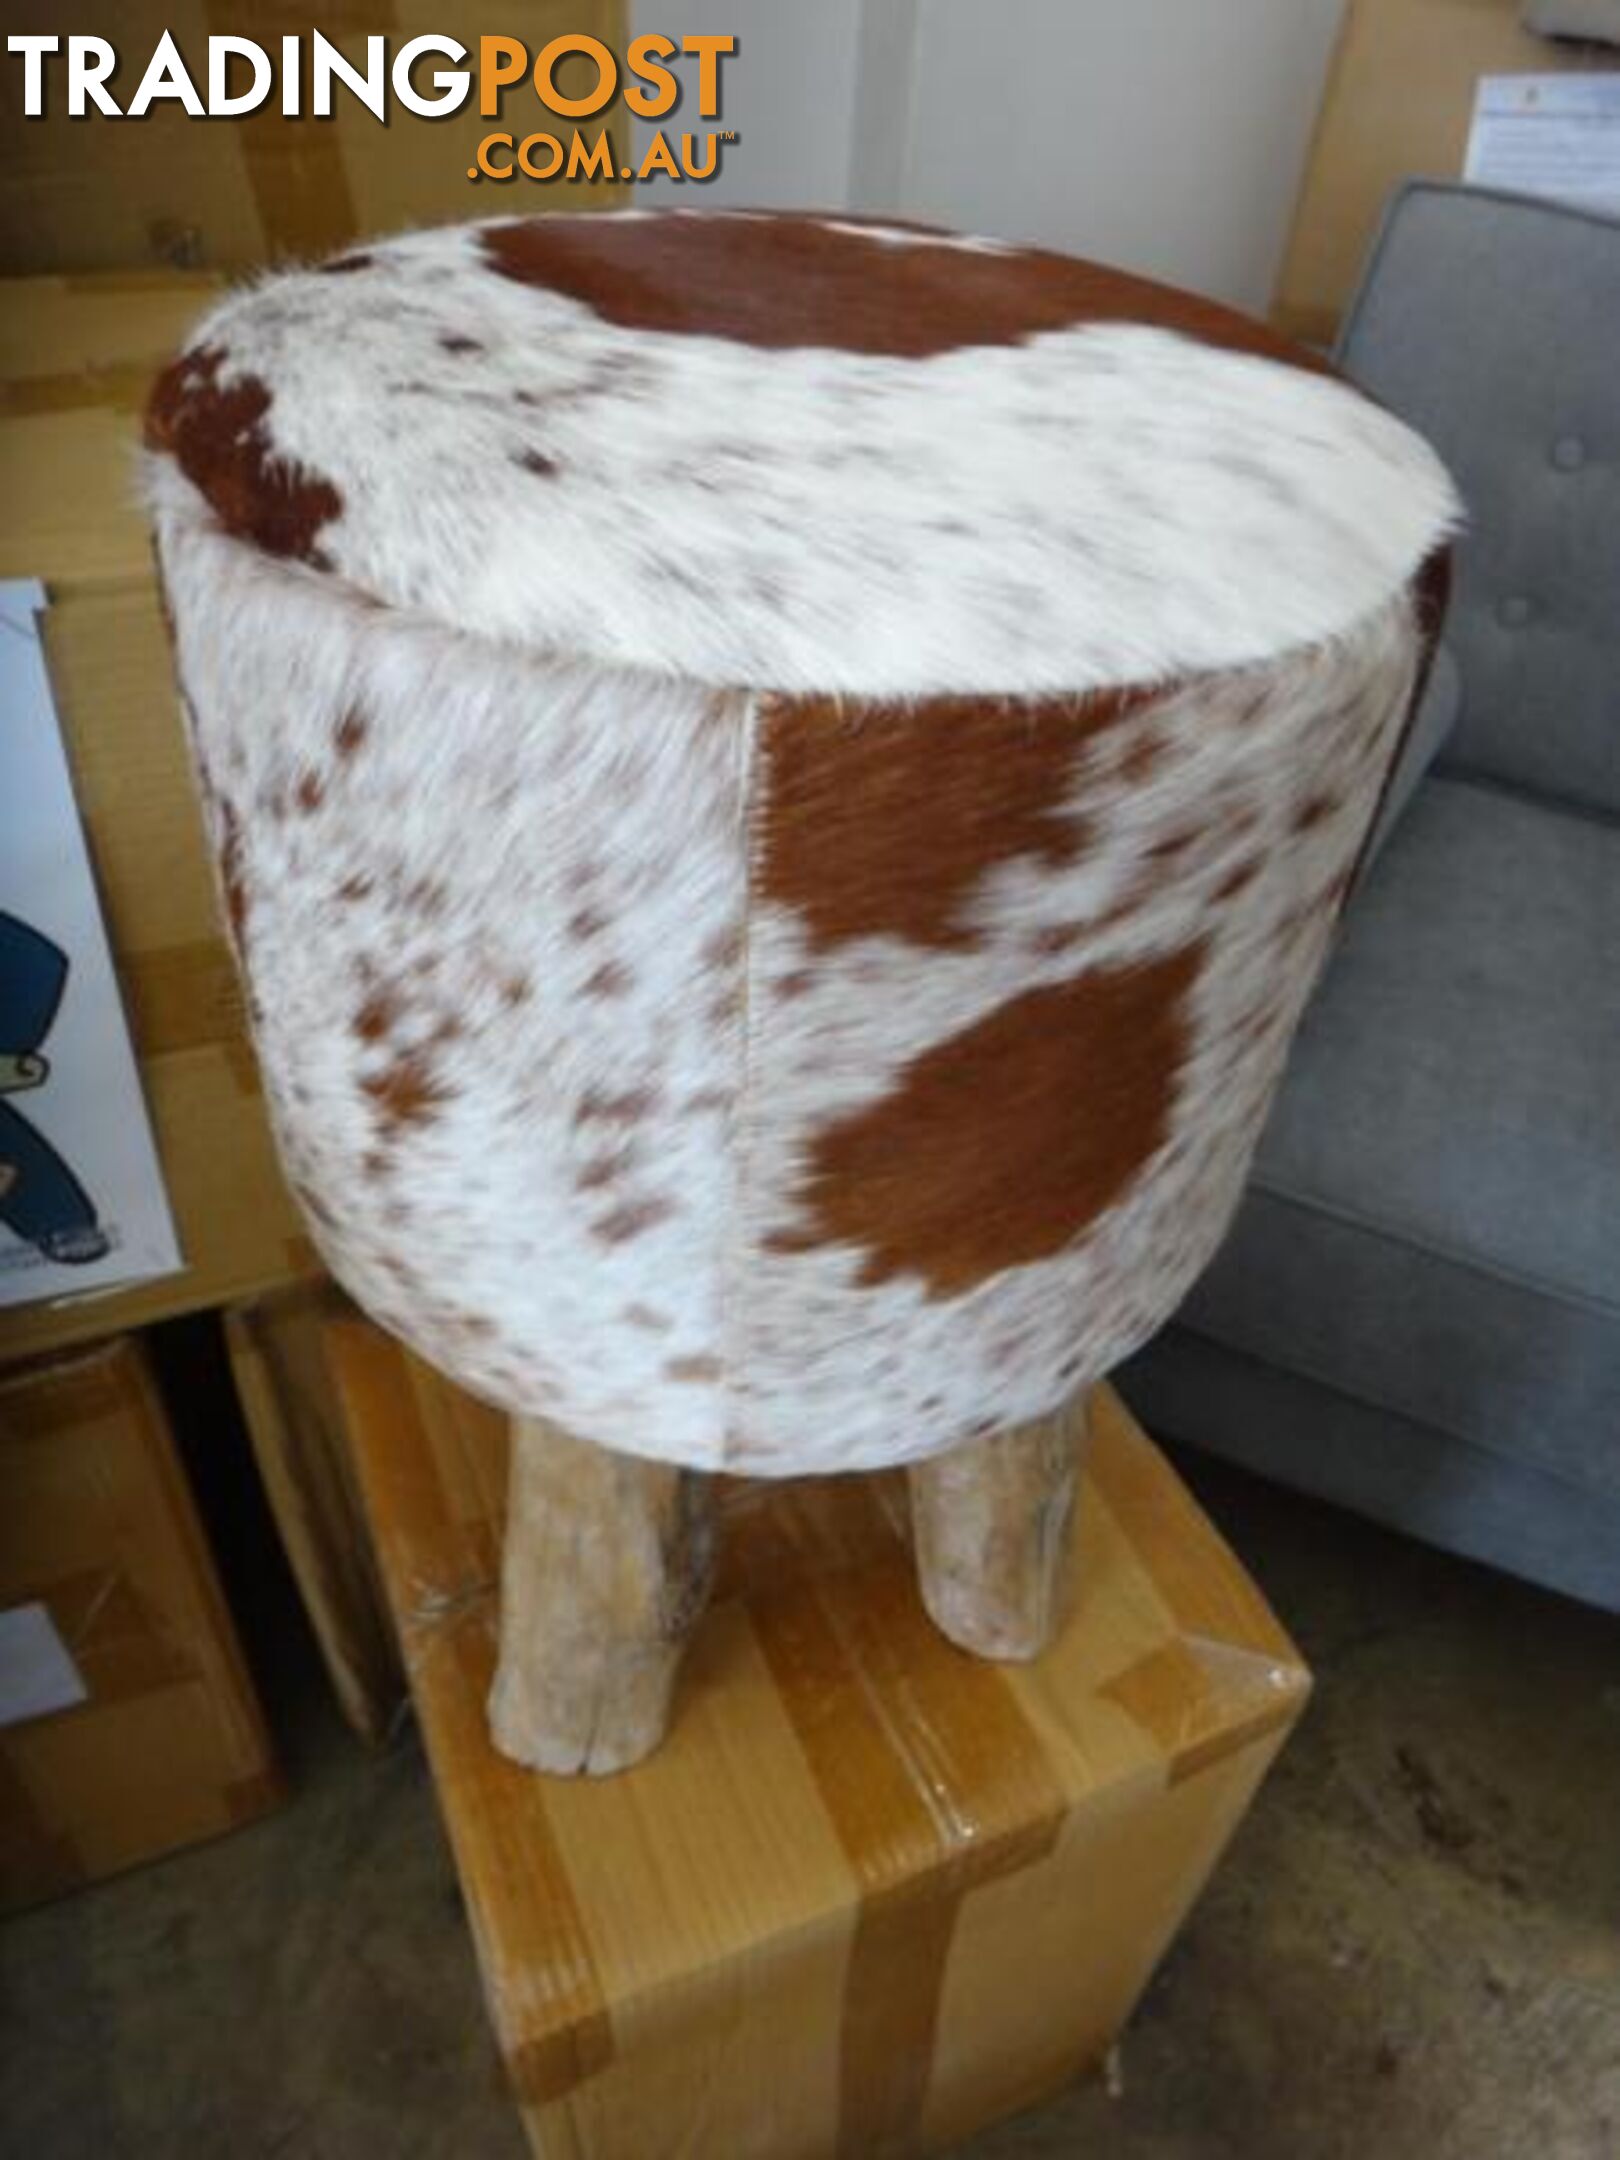 NEW! RODEO STOOL - FURNITURE DISCOUNT WAREHOUSE. 50% - 80% OFF